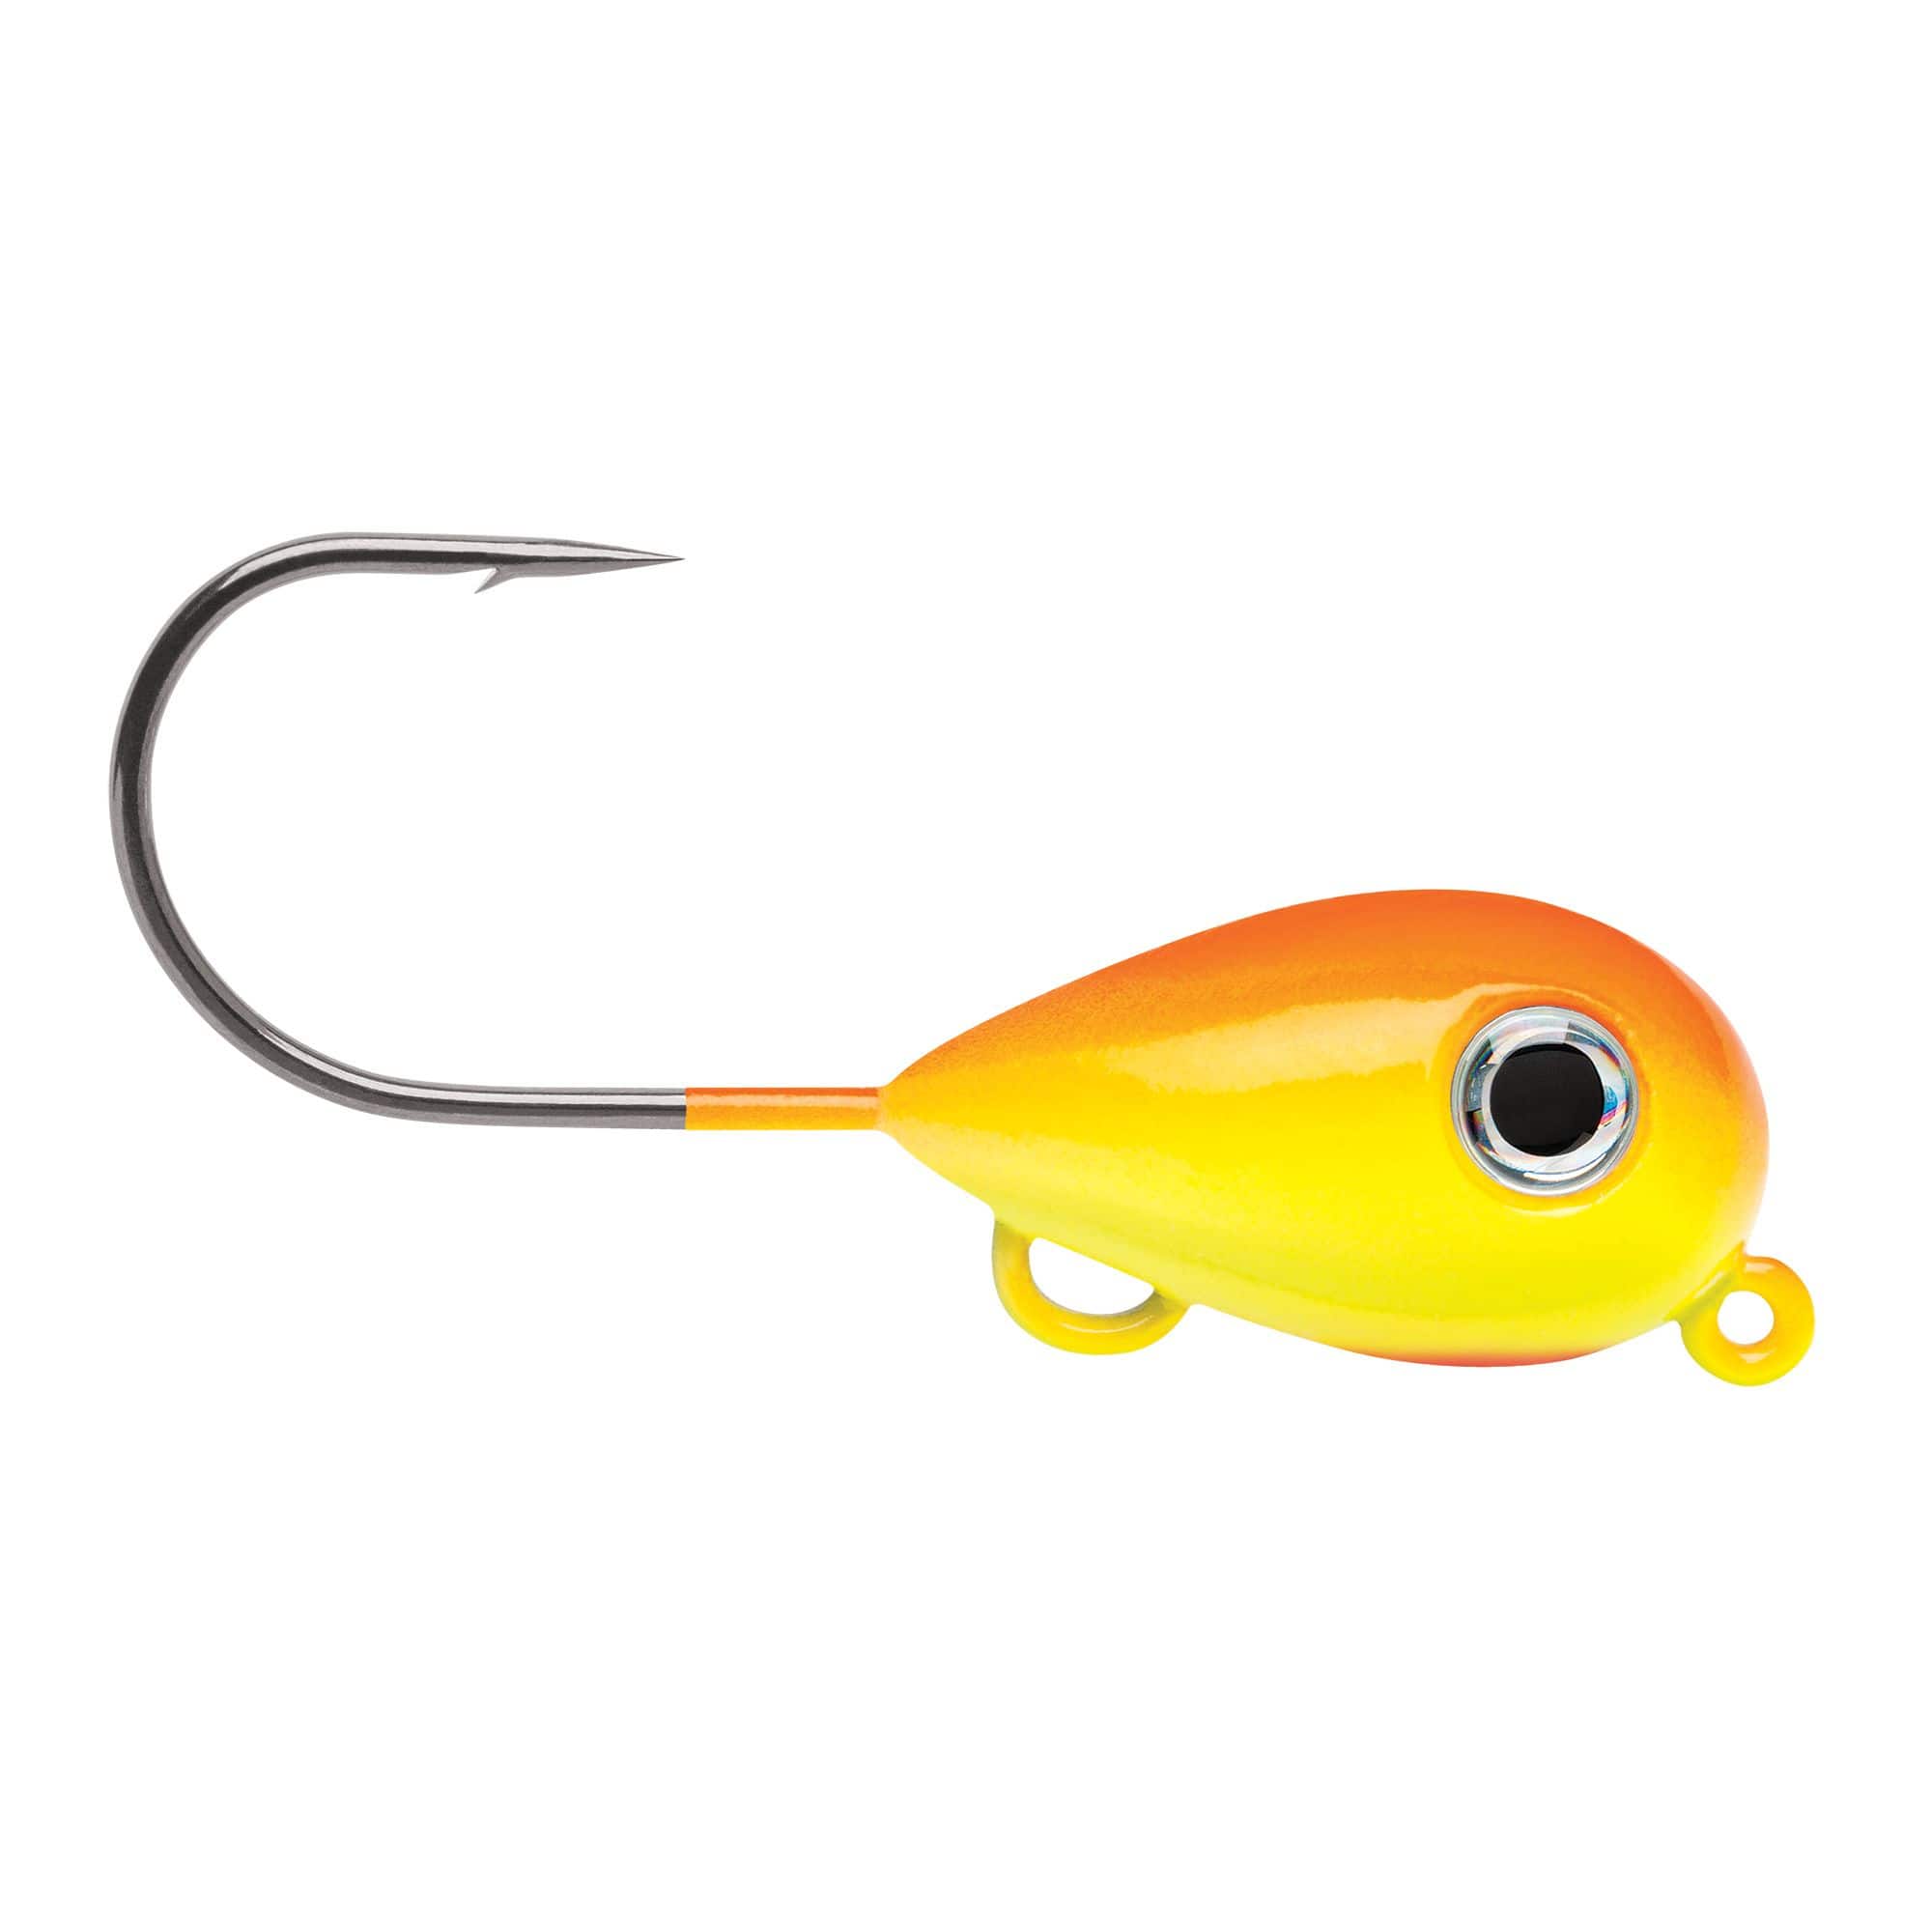  Northland Tackle Gum-Drop Floater, Assorted, 1 Hook : Fishing  Floating Lures : Sports & Outdoors